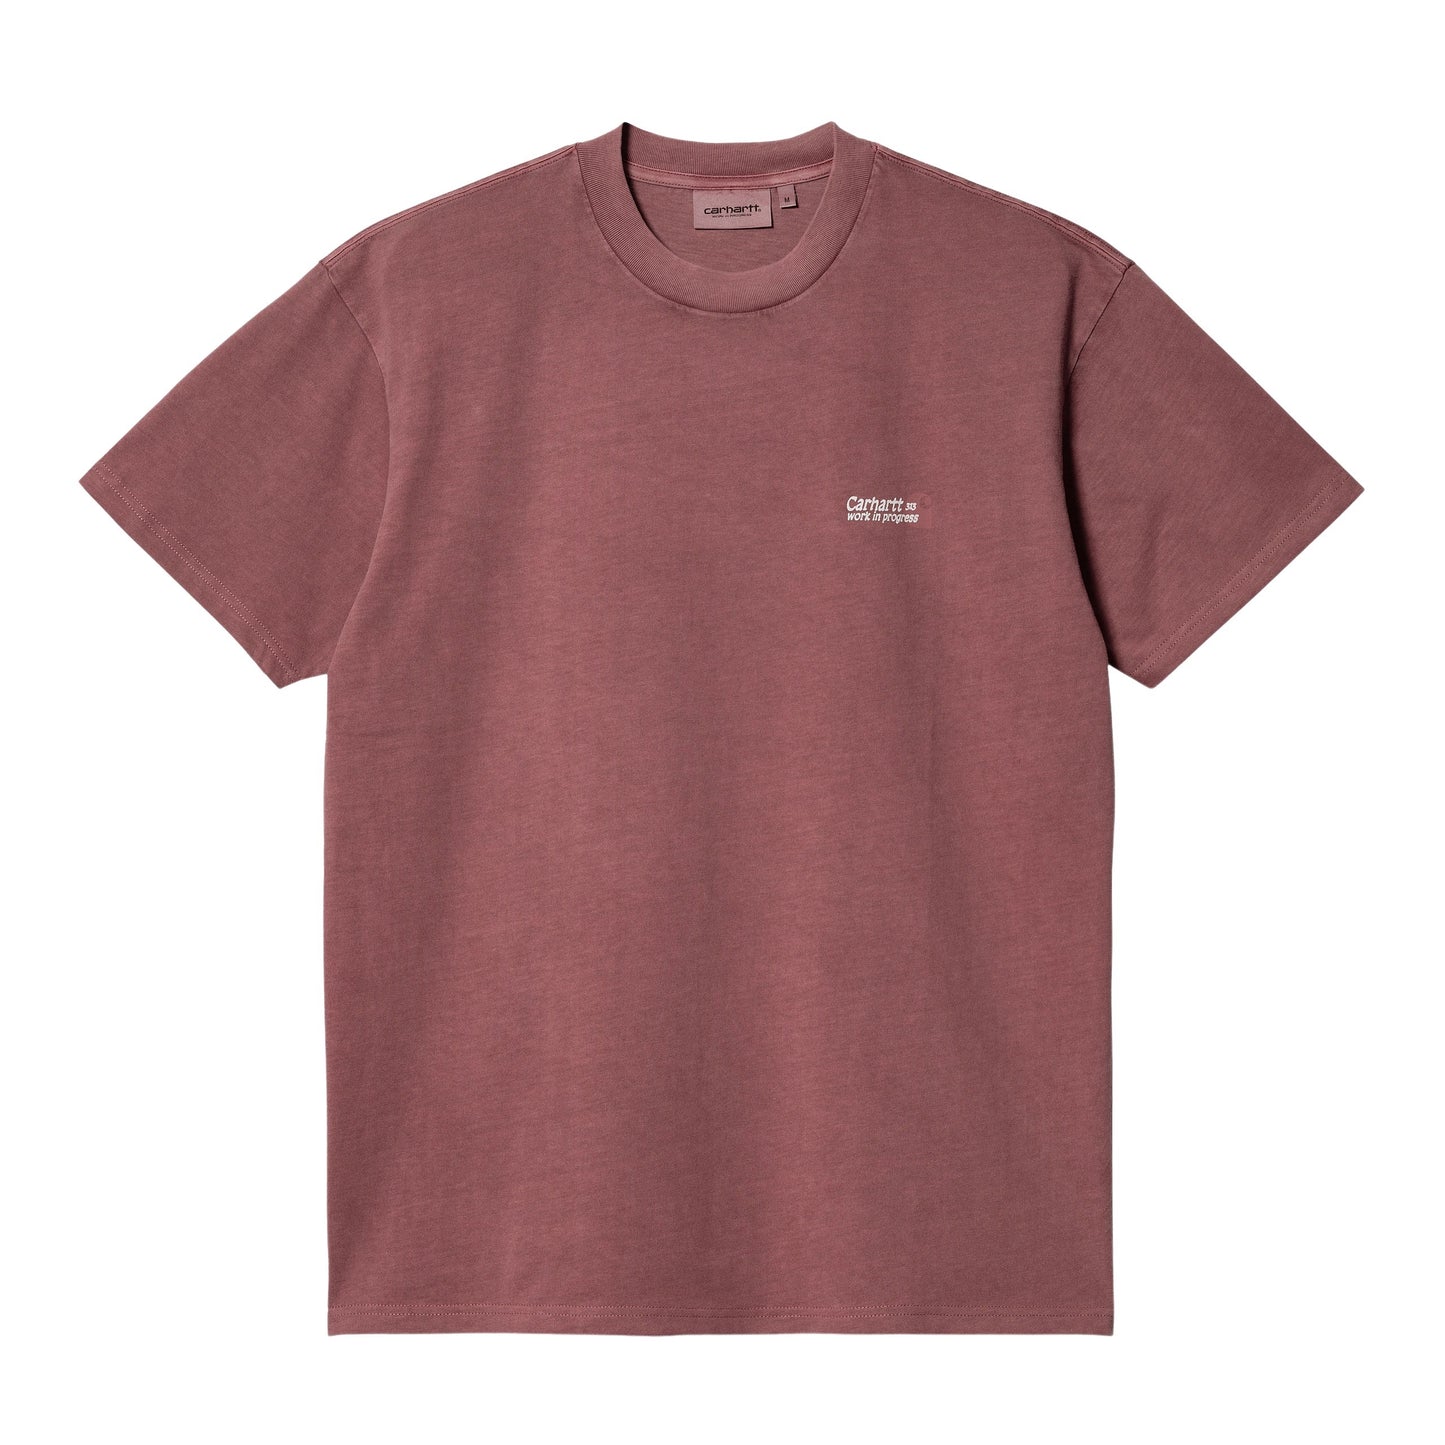 Carhartt WIP S/S Radiant T-Shirt-punch-pigment-garment-dyed